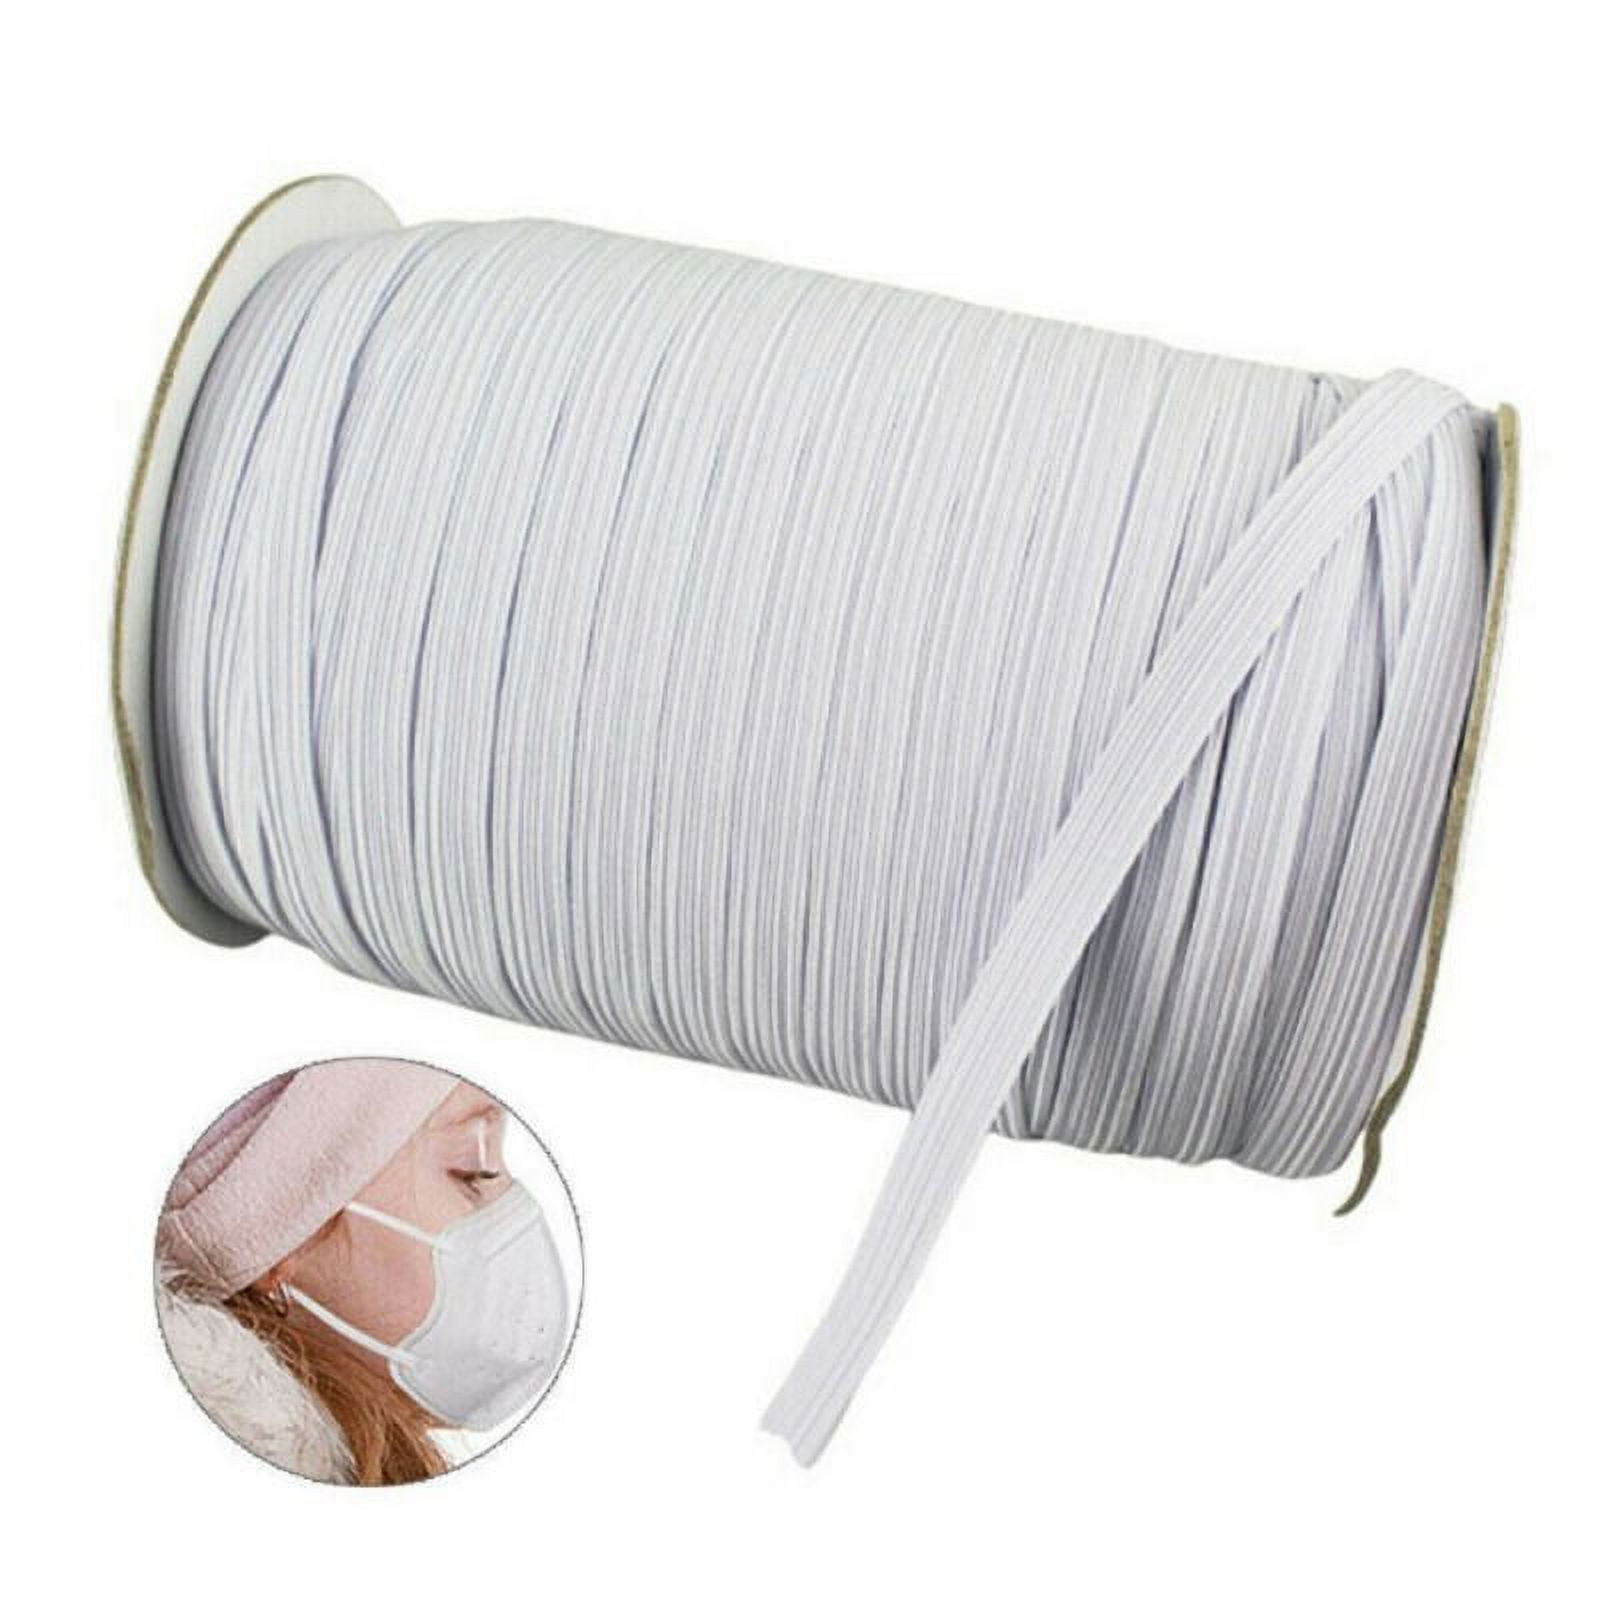 3 Pack 70 Yards Length 1/4 inch Width Briaded Elastic Band White Elastic String Cord Heavy Stretch High Elasticity Knit Elastic Band for Sewing Craft